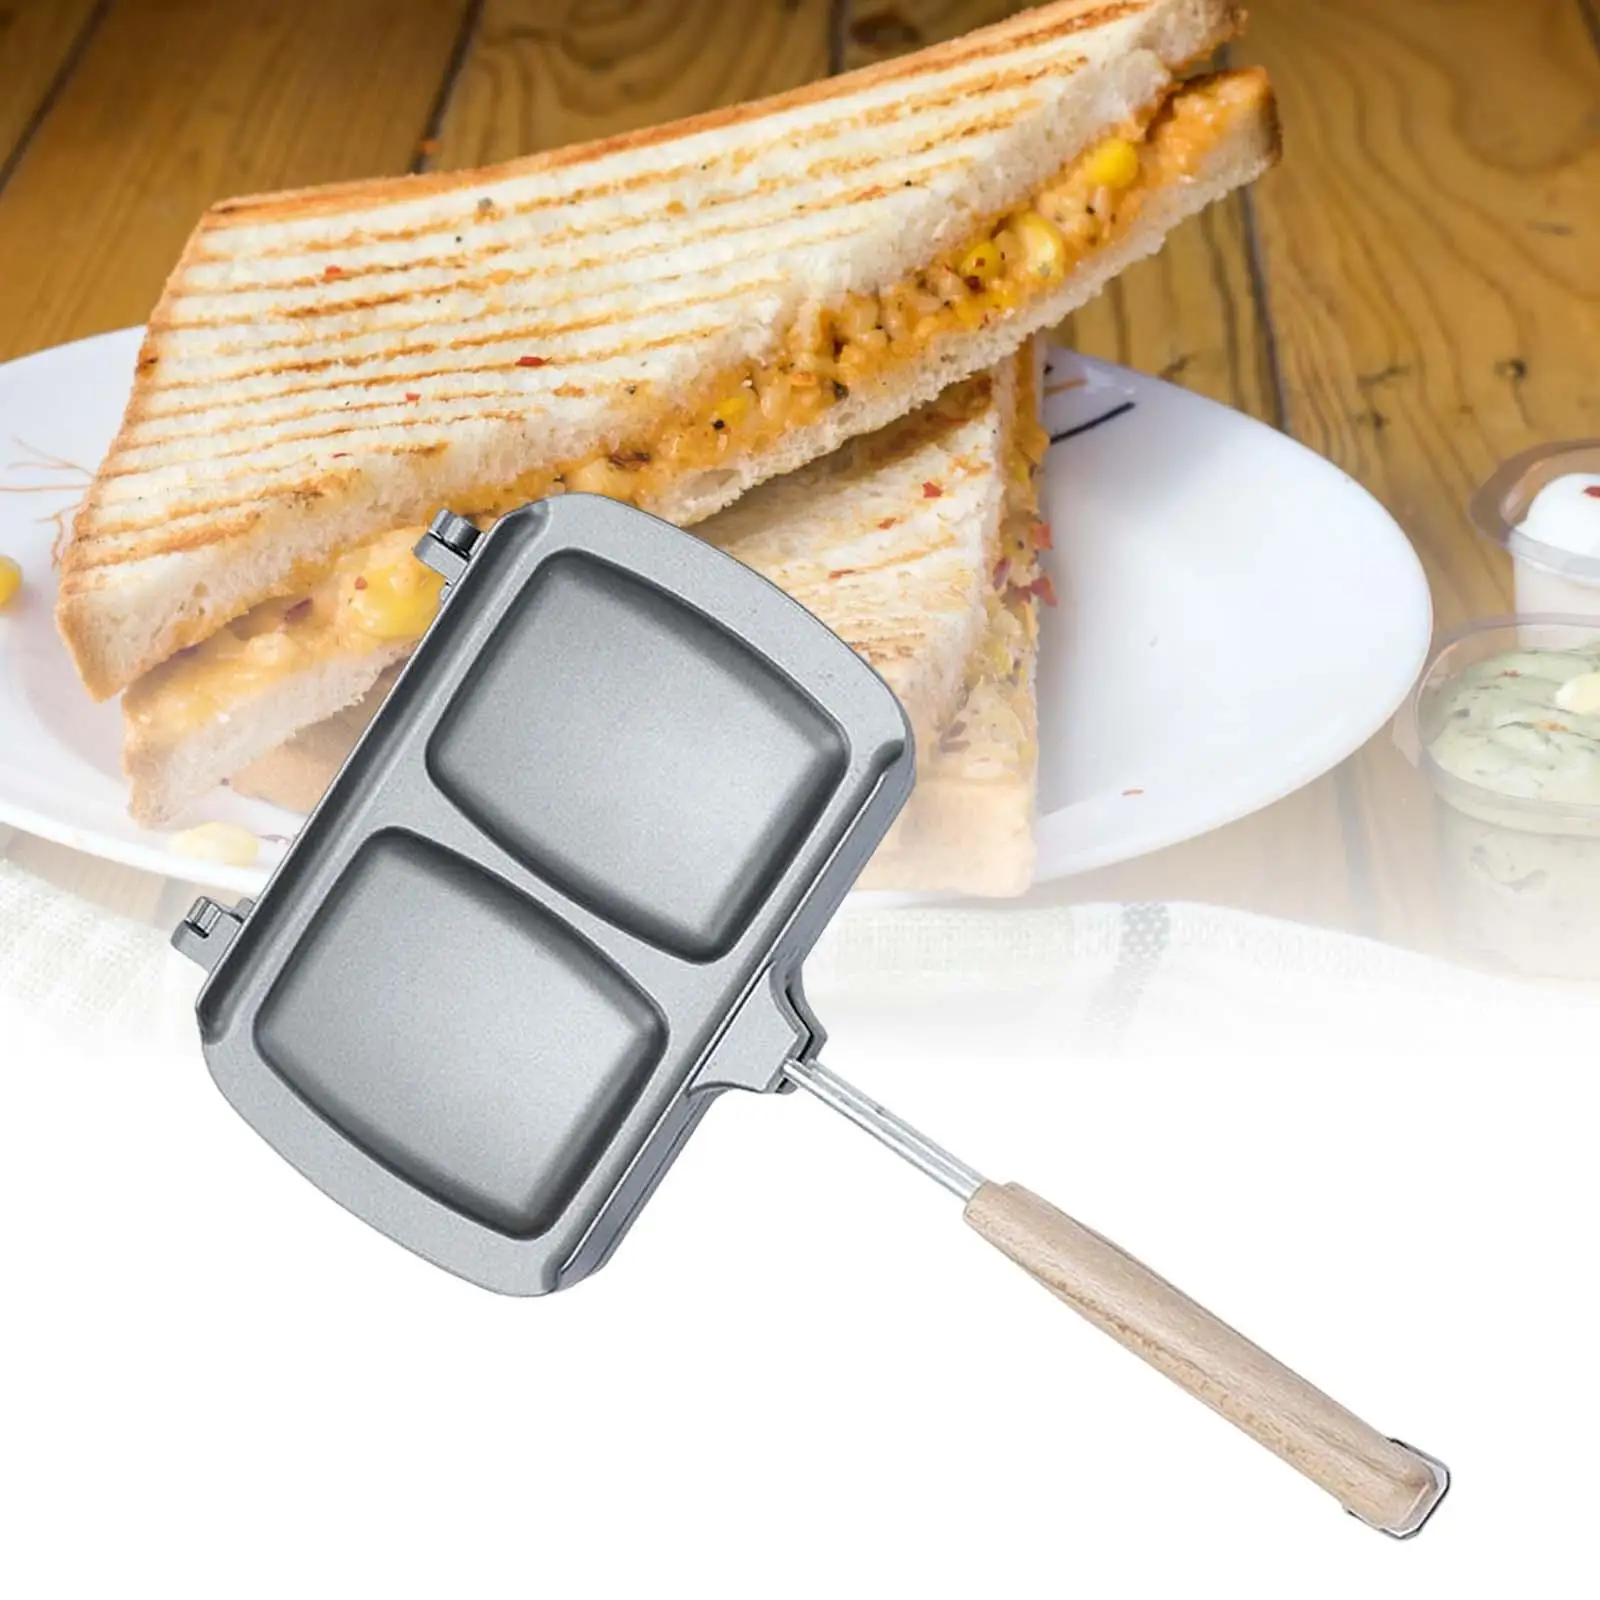 Bread Toast Maker Non Stick Grill Pan Double Sided Heating Frying Egg Ham Sandwiches Maker for Induction Cooker Stove Top 5000w high power induction cooker commercial stainless steel plane induction stove household stir fry electric frying stove 220v